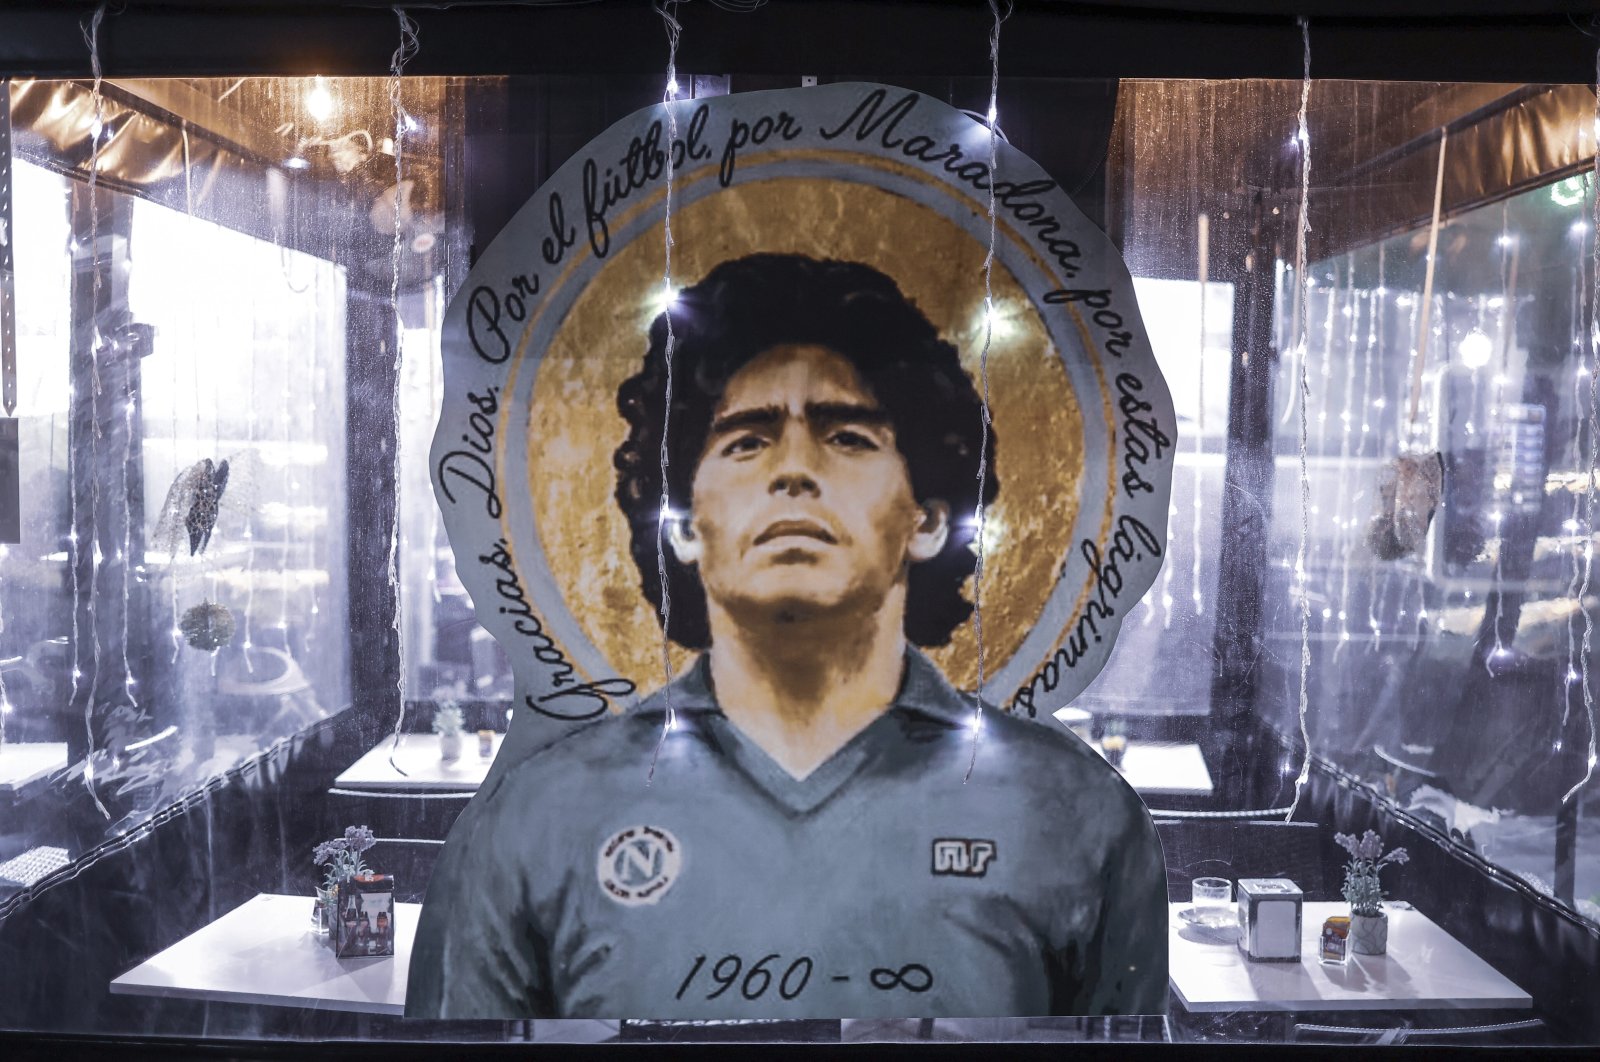 A portrait of Diego Armando Maradona stands out at a restaurant in Naples, Italy, Nov. 24, 2021. (AP Photo)